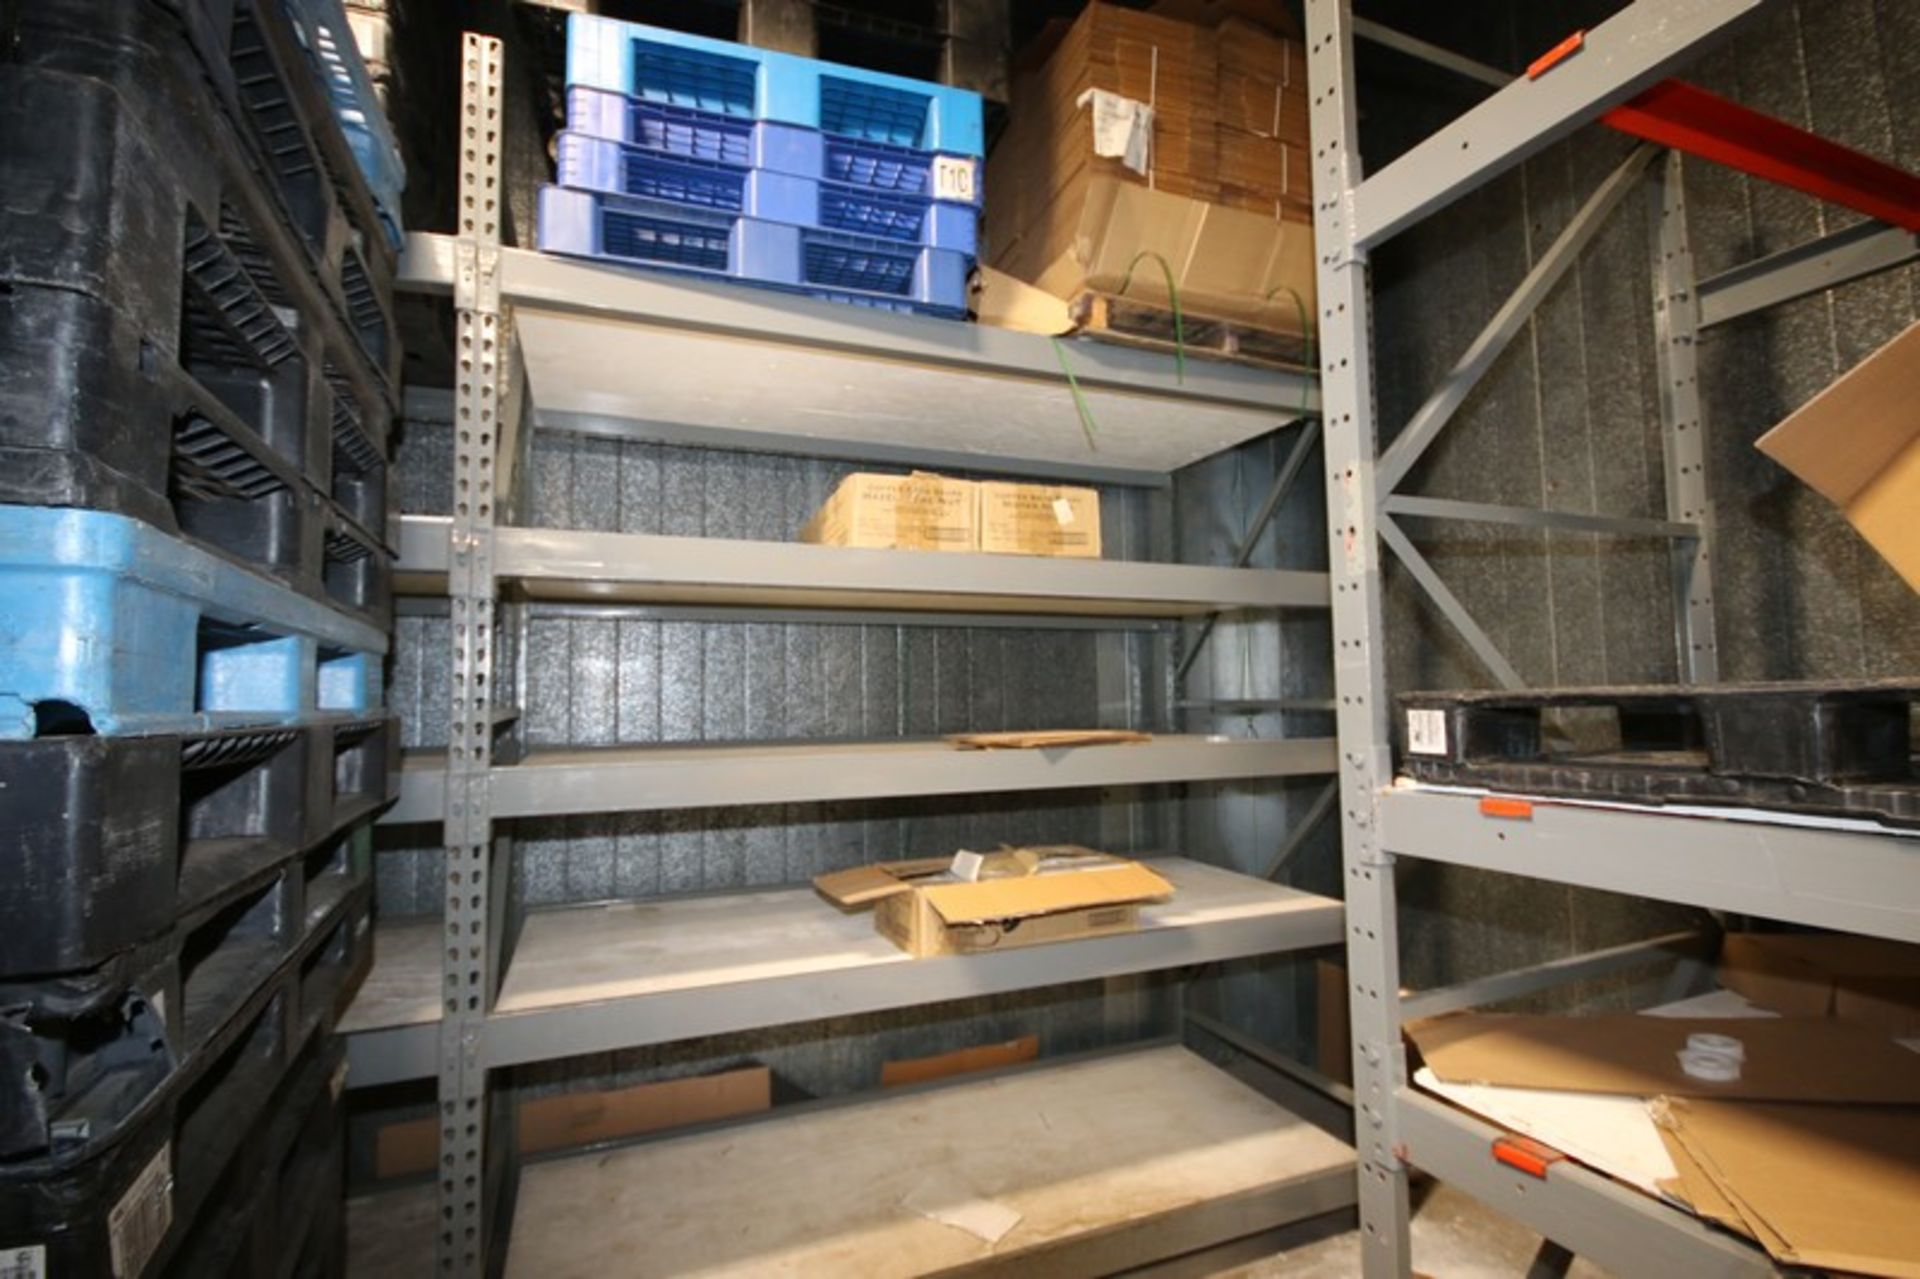 11-Sections of Pallet Racking, with Uprights and Cross Beams, Some with 2-High Shelves and 3-High - Image 4 of 4